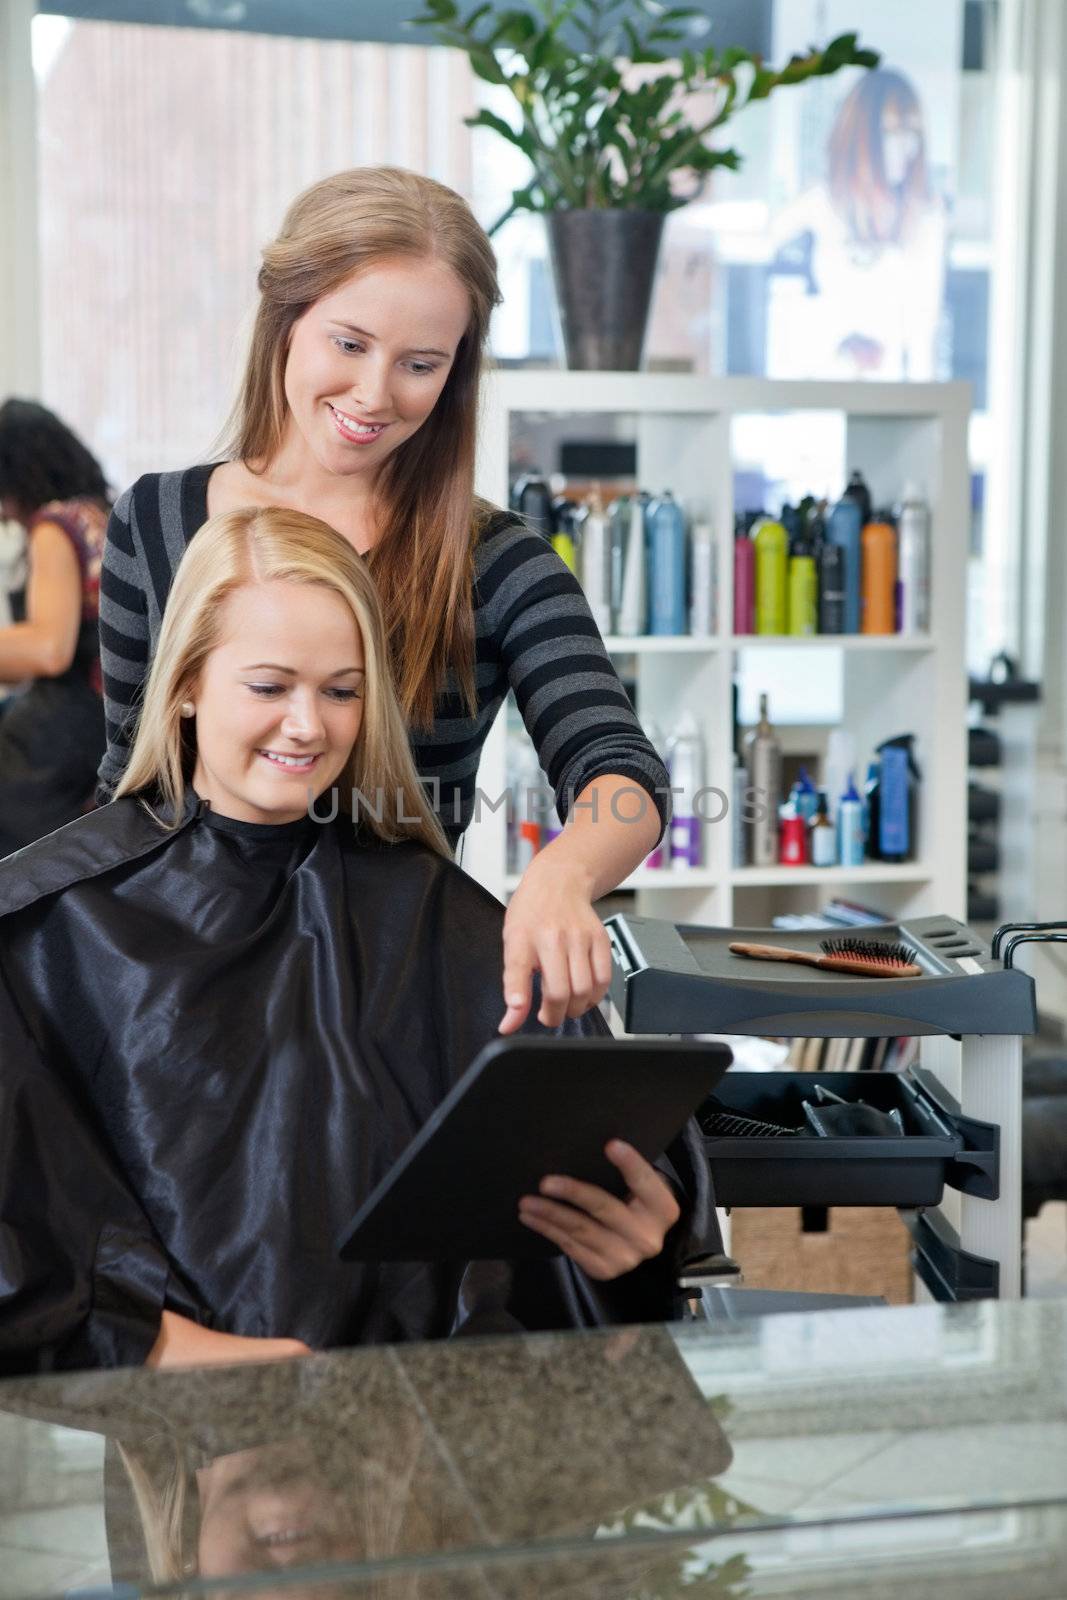 Mirror reflection of hairdresser pointing at digital tablet while female customer holding it